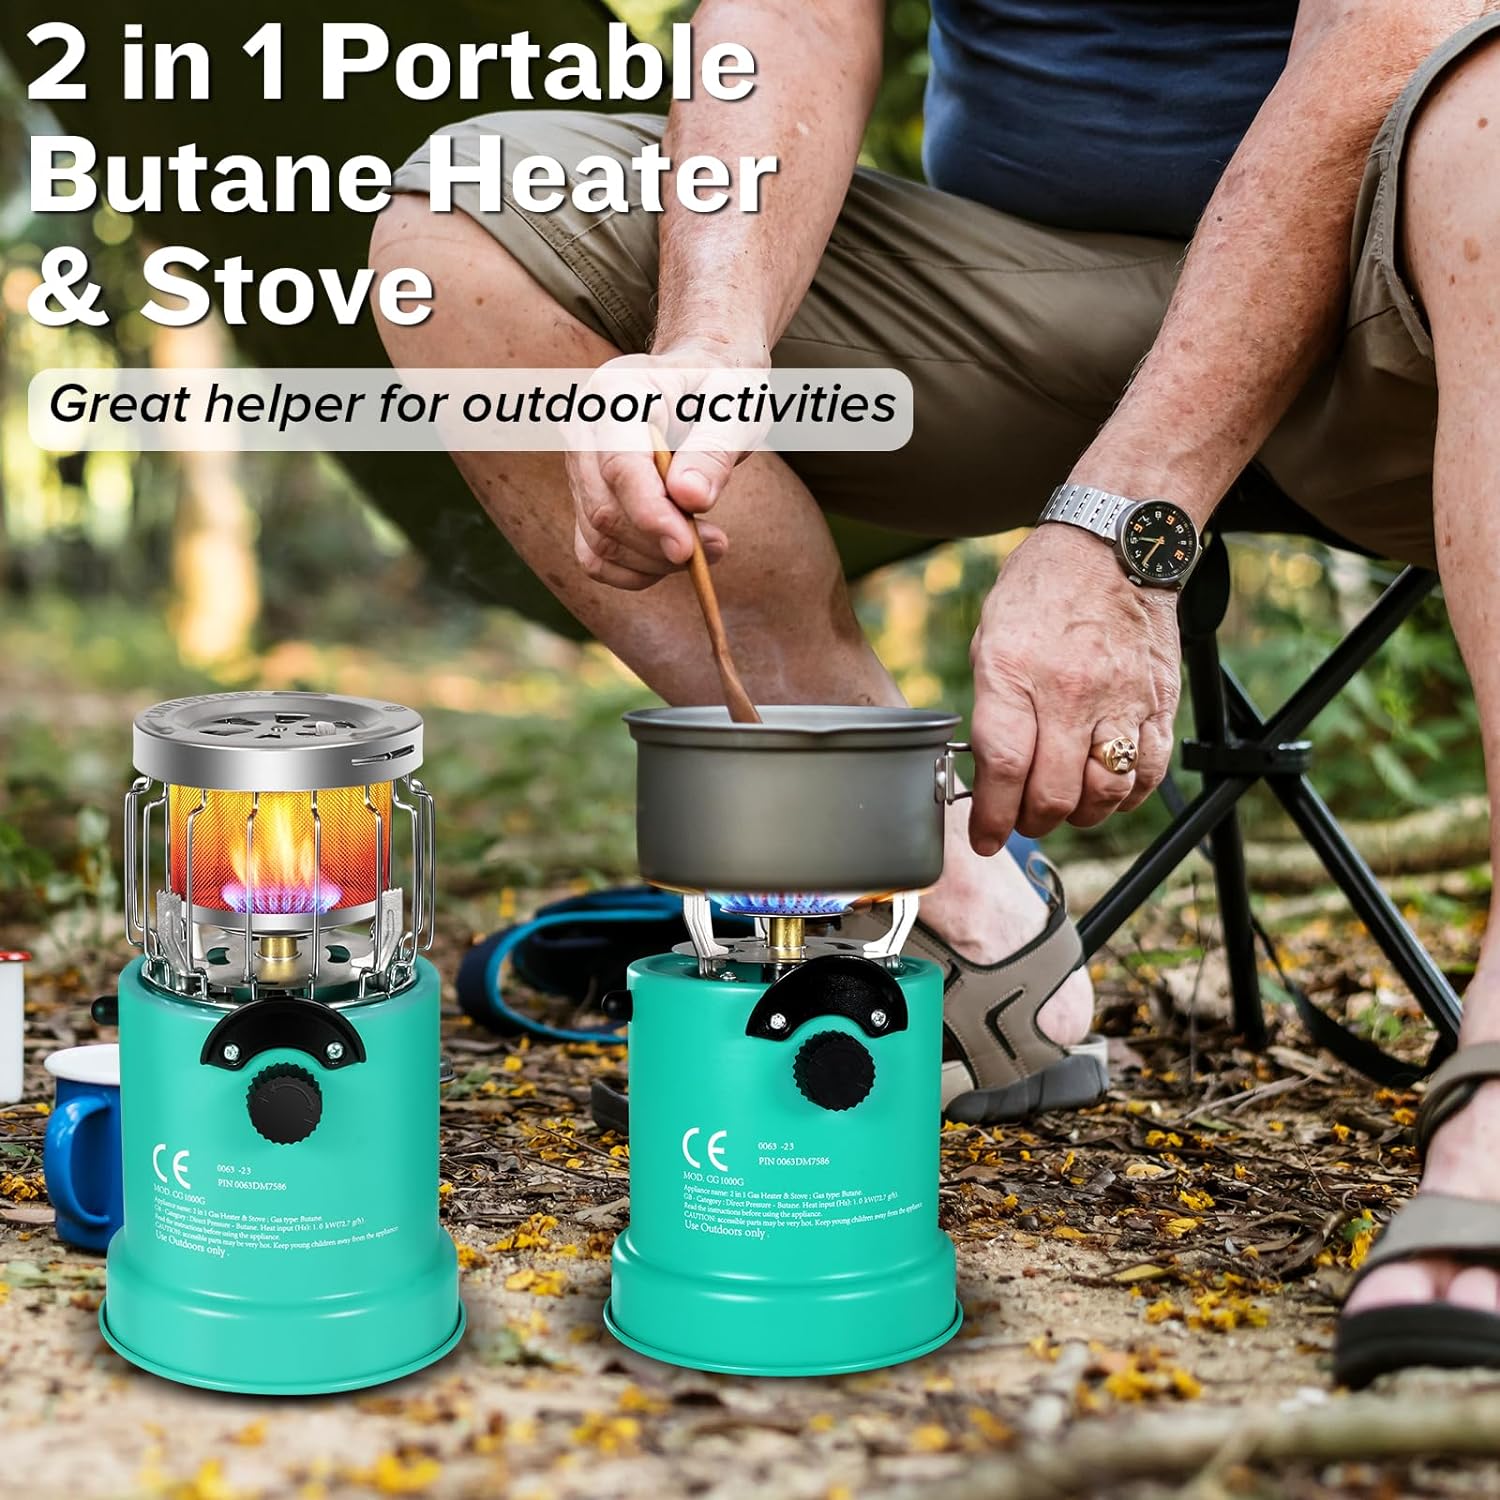 2 in 1 Portable Propane Heater  Stove,Outdoor stove with automatic igniter. for Camping Ice Fishing, Hunting Survival（Pot not included） - 2 In 1 Portable Propane Heater & Stove Review